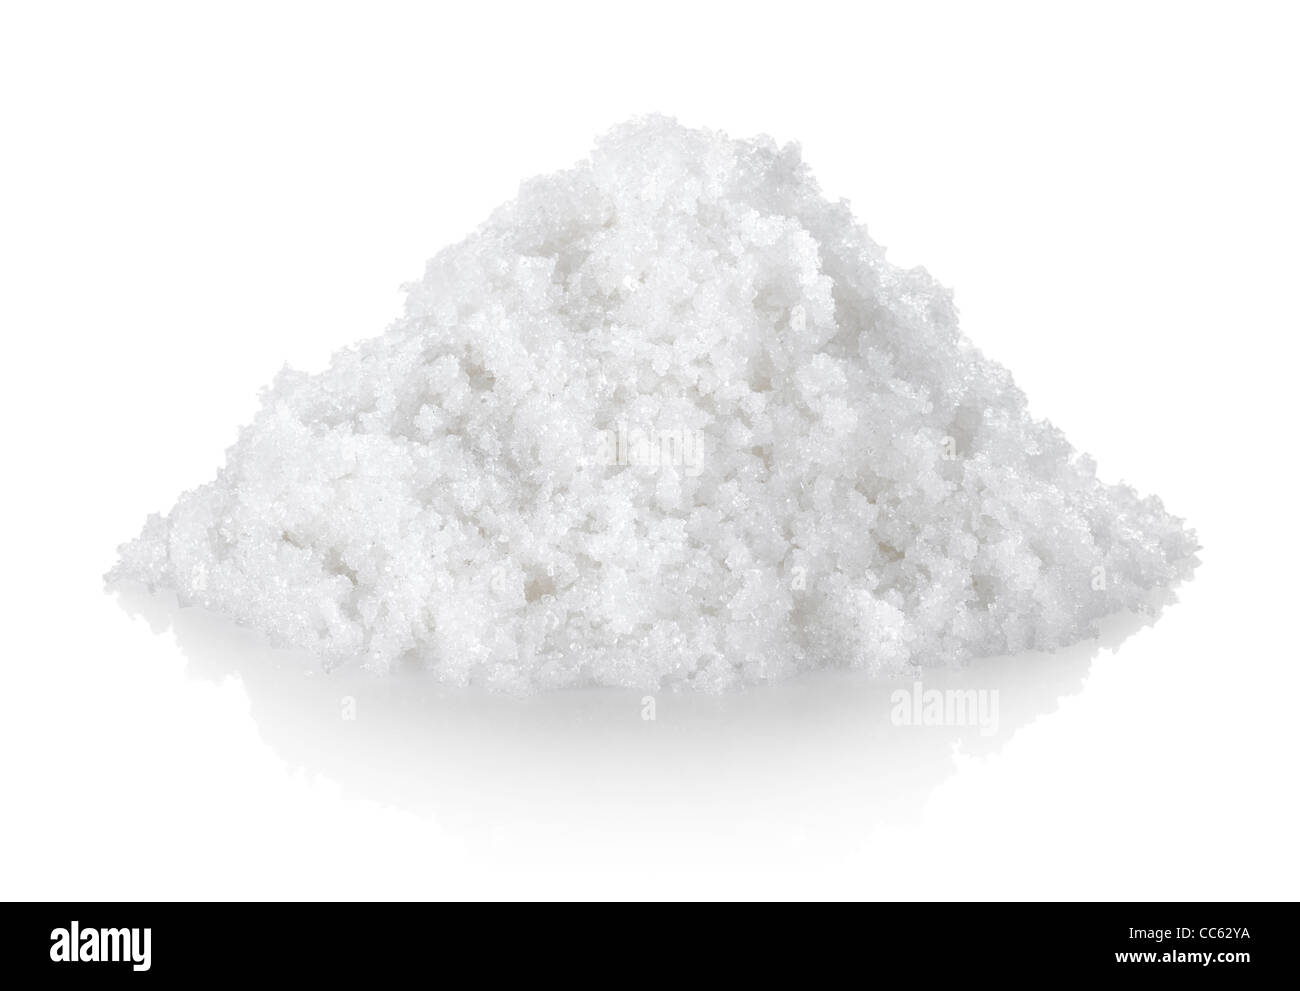 Heap of white processed granulated sugar, isolated on a white background. Stock Photo